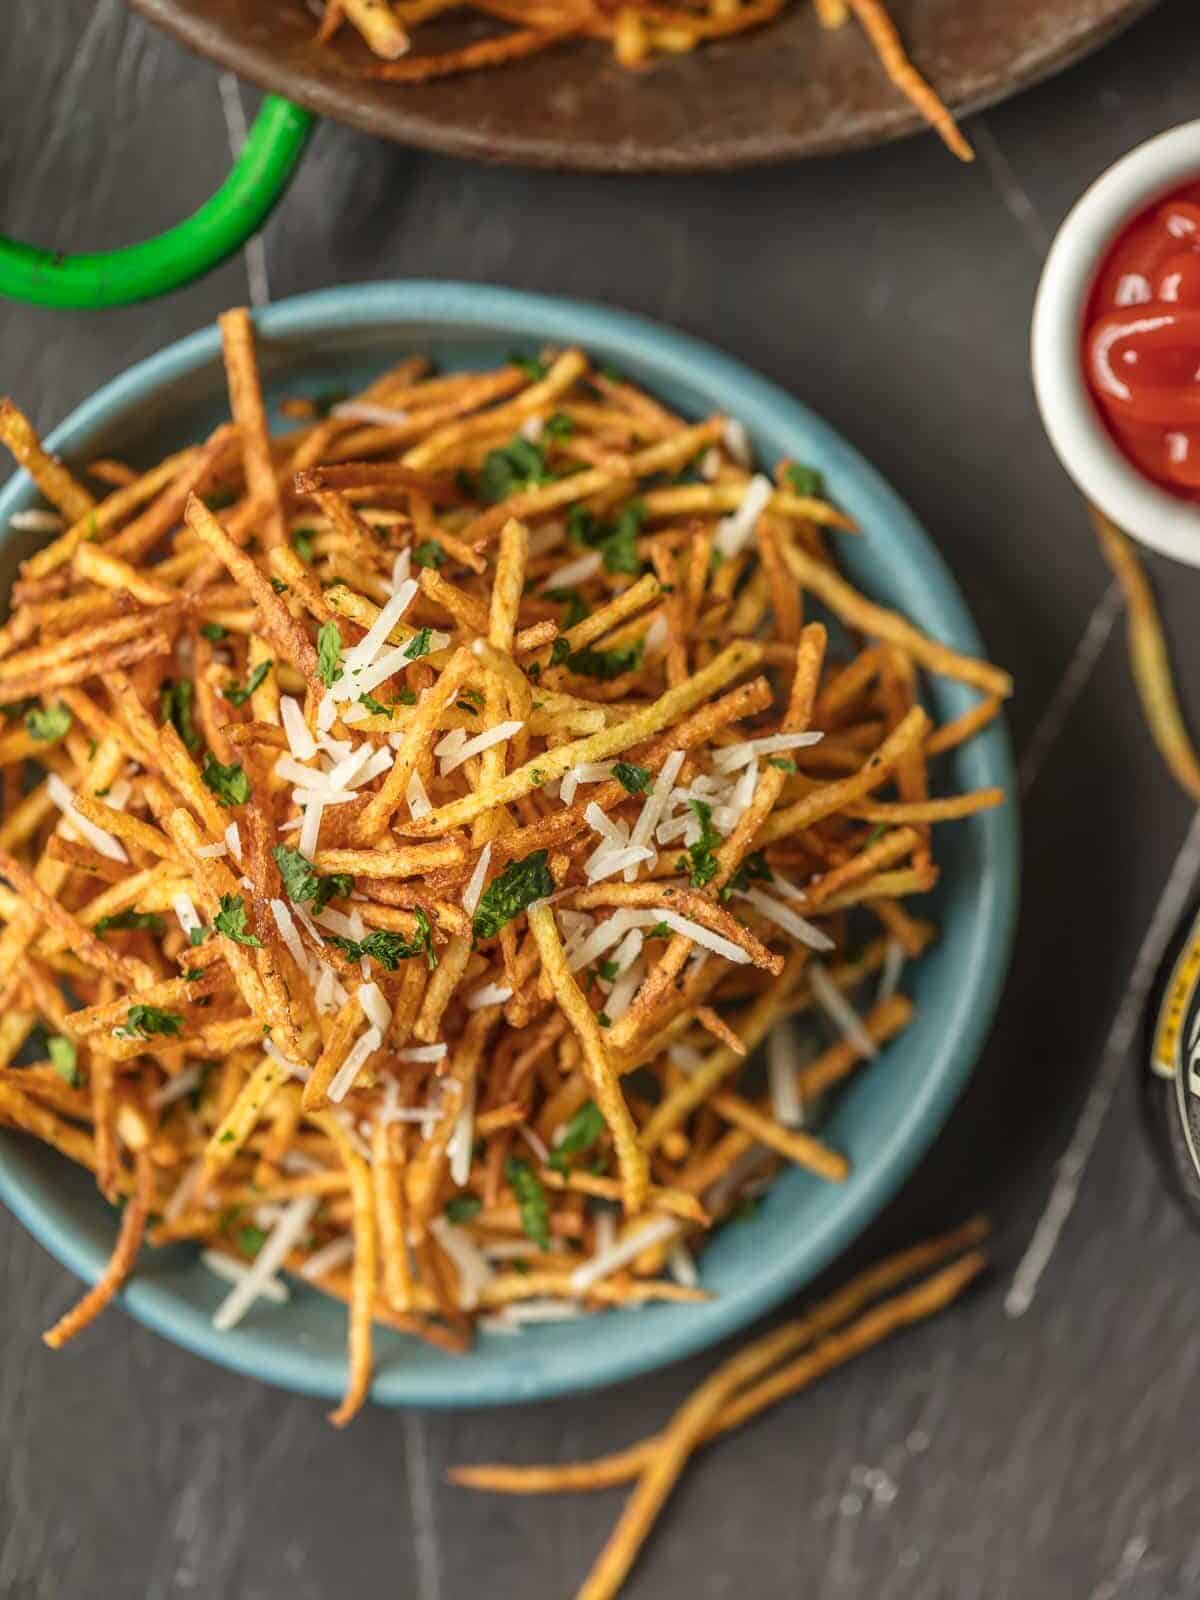 Shoestring Potatoes piled in a blue bowl.